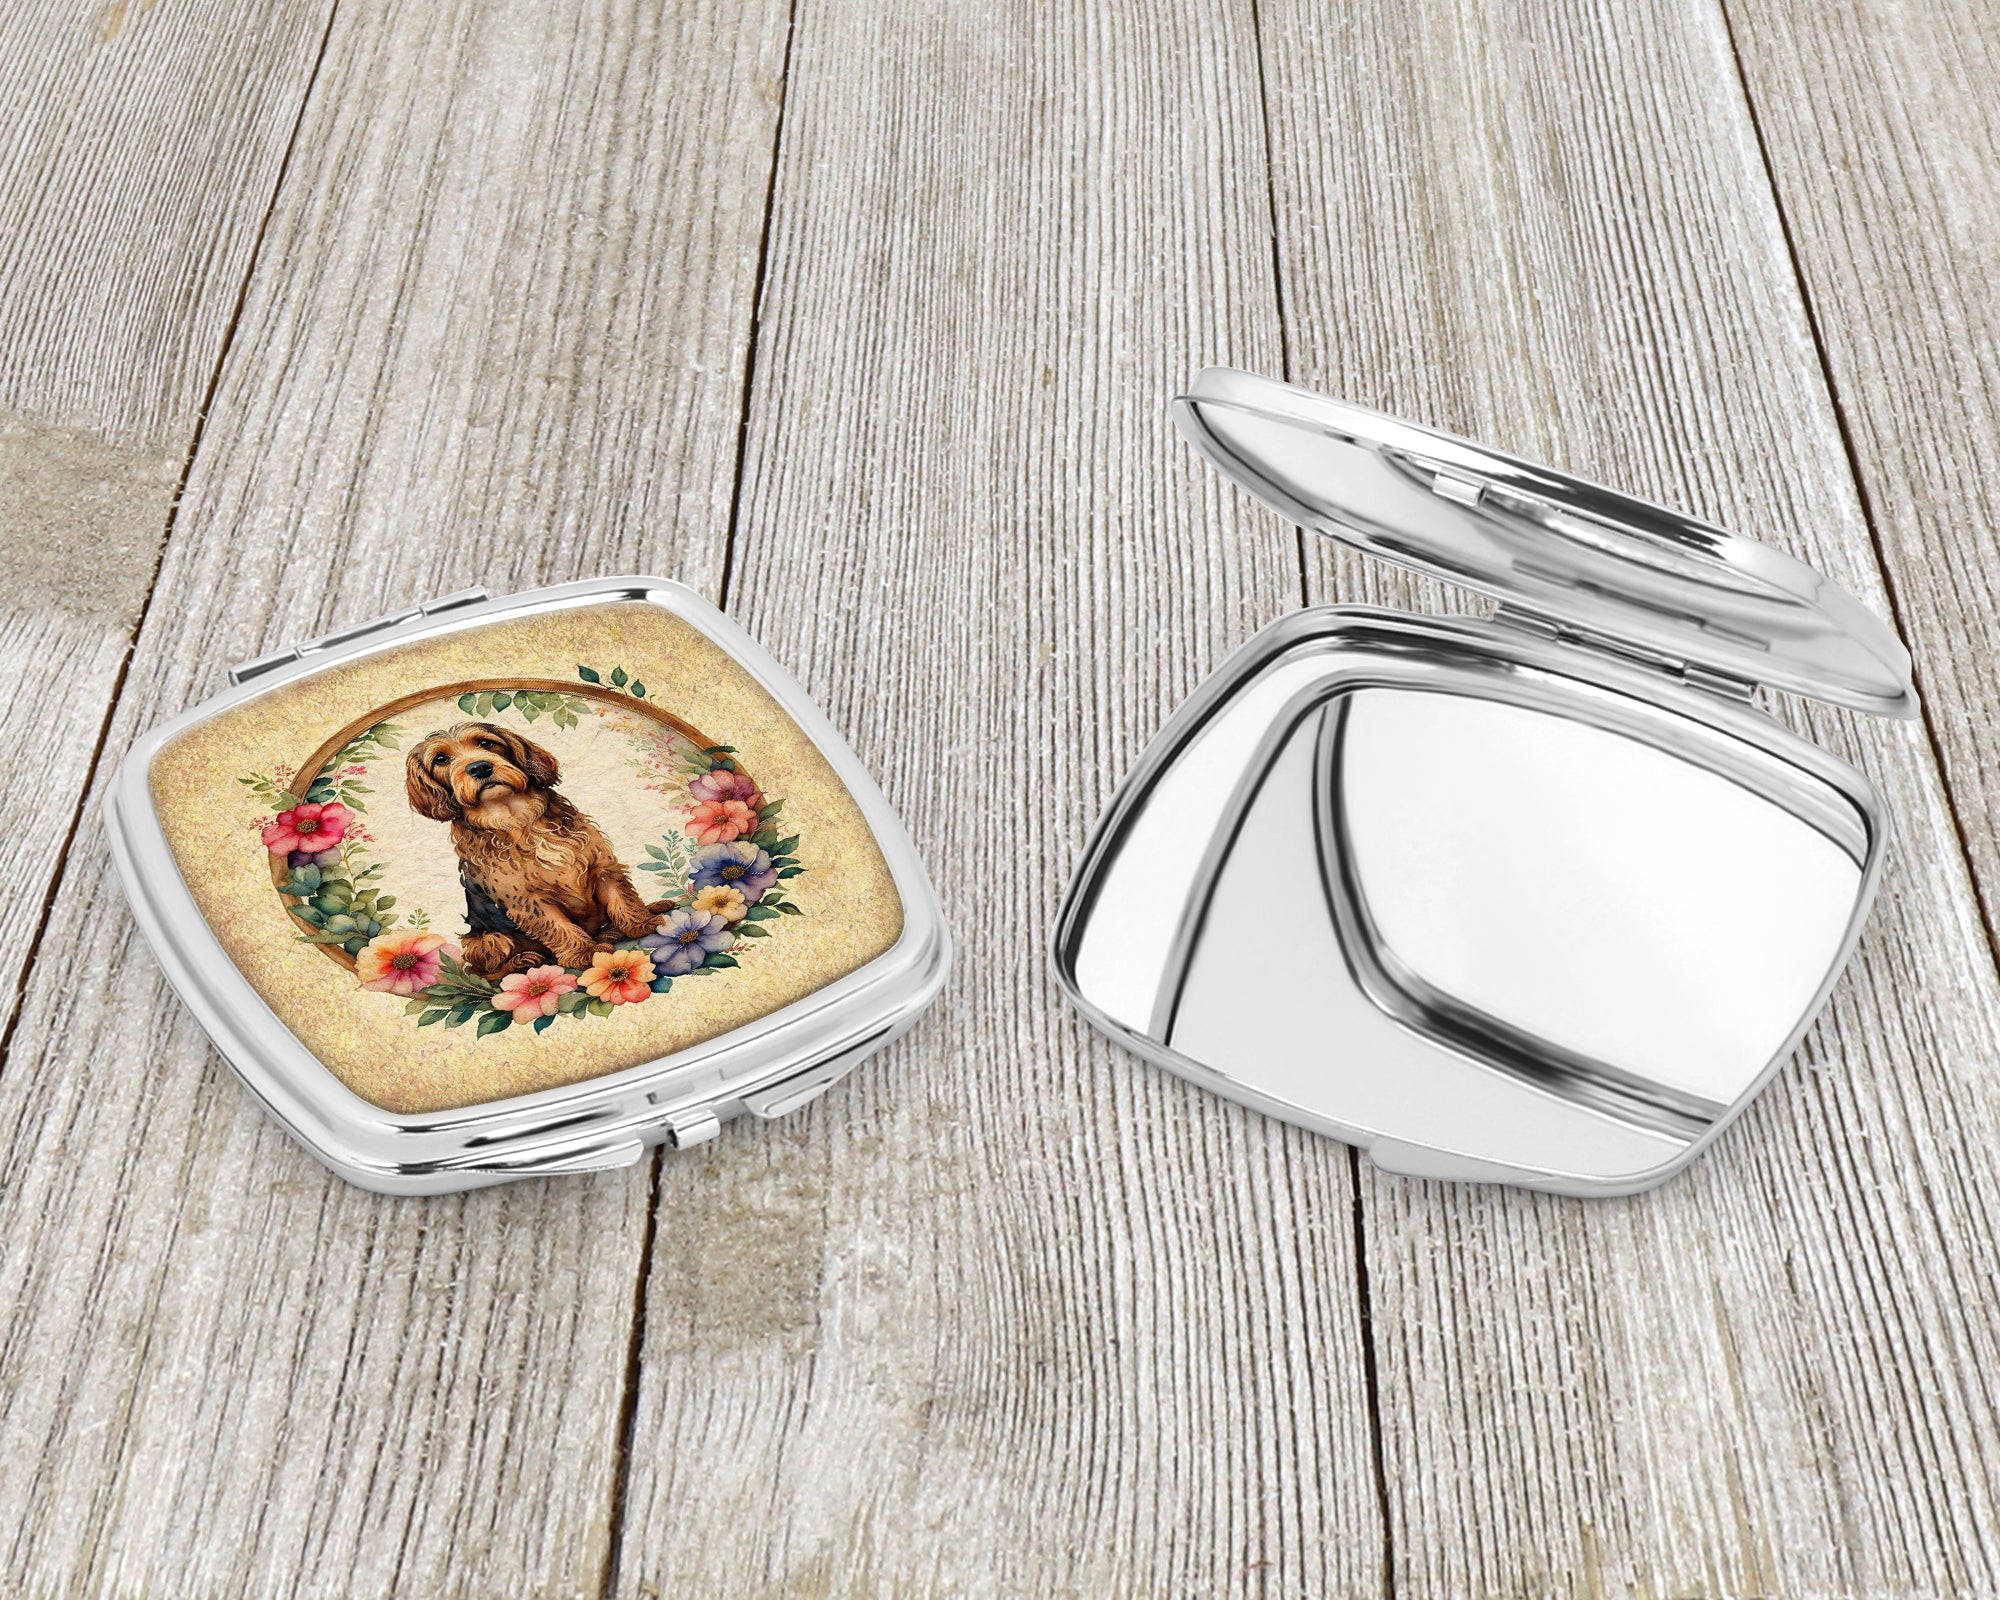 Otterhound and Flowers Compact Mirror